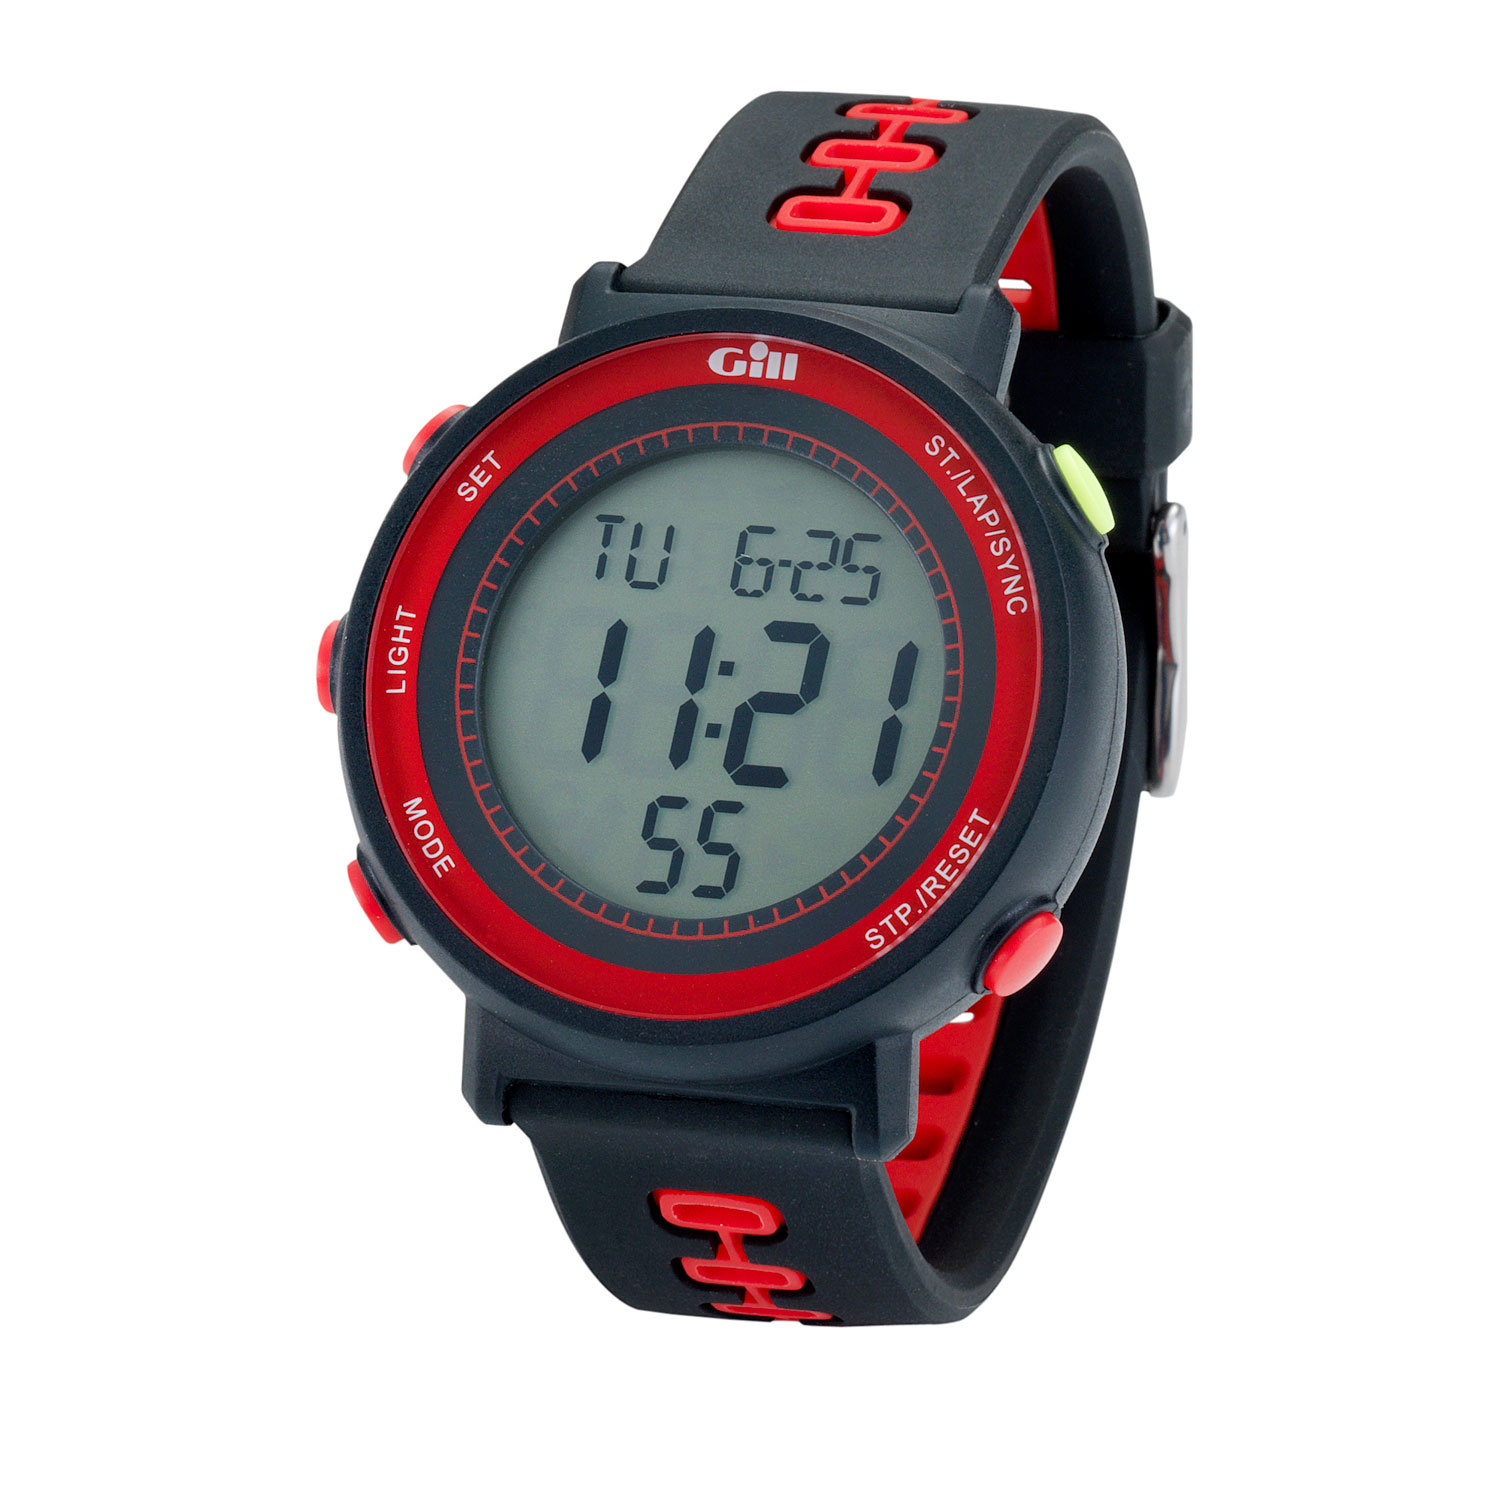 Gill Race Sailing Watch - Gill Watches - Black/Red | eBay